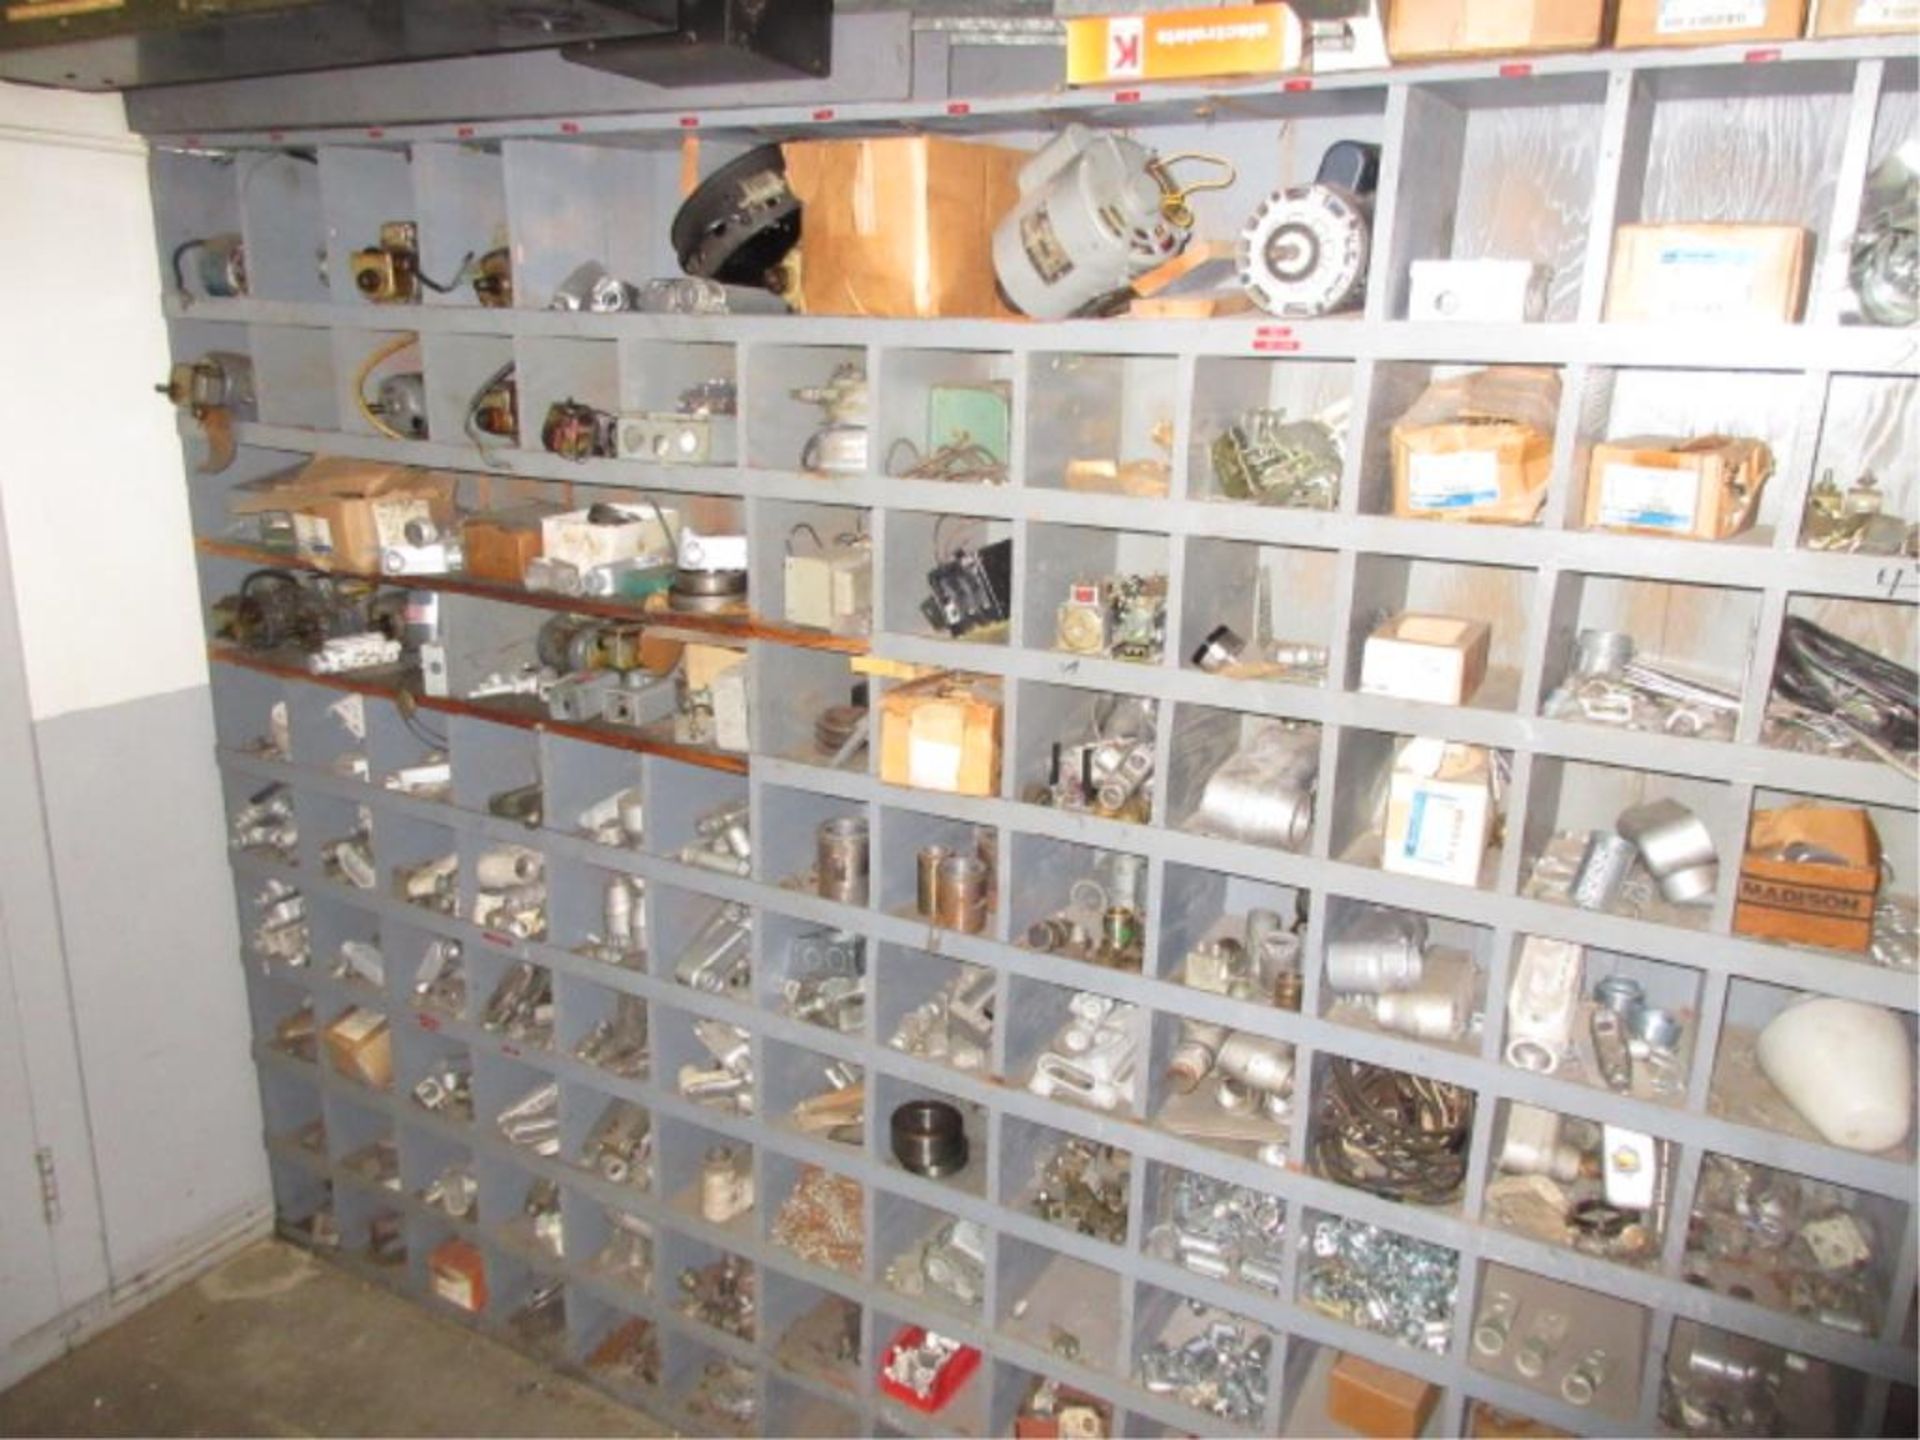 Lot Contents of Electrical Shop, includes cabinets, contents, conduit, etc. in three rooms. - Image 8 of 17